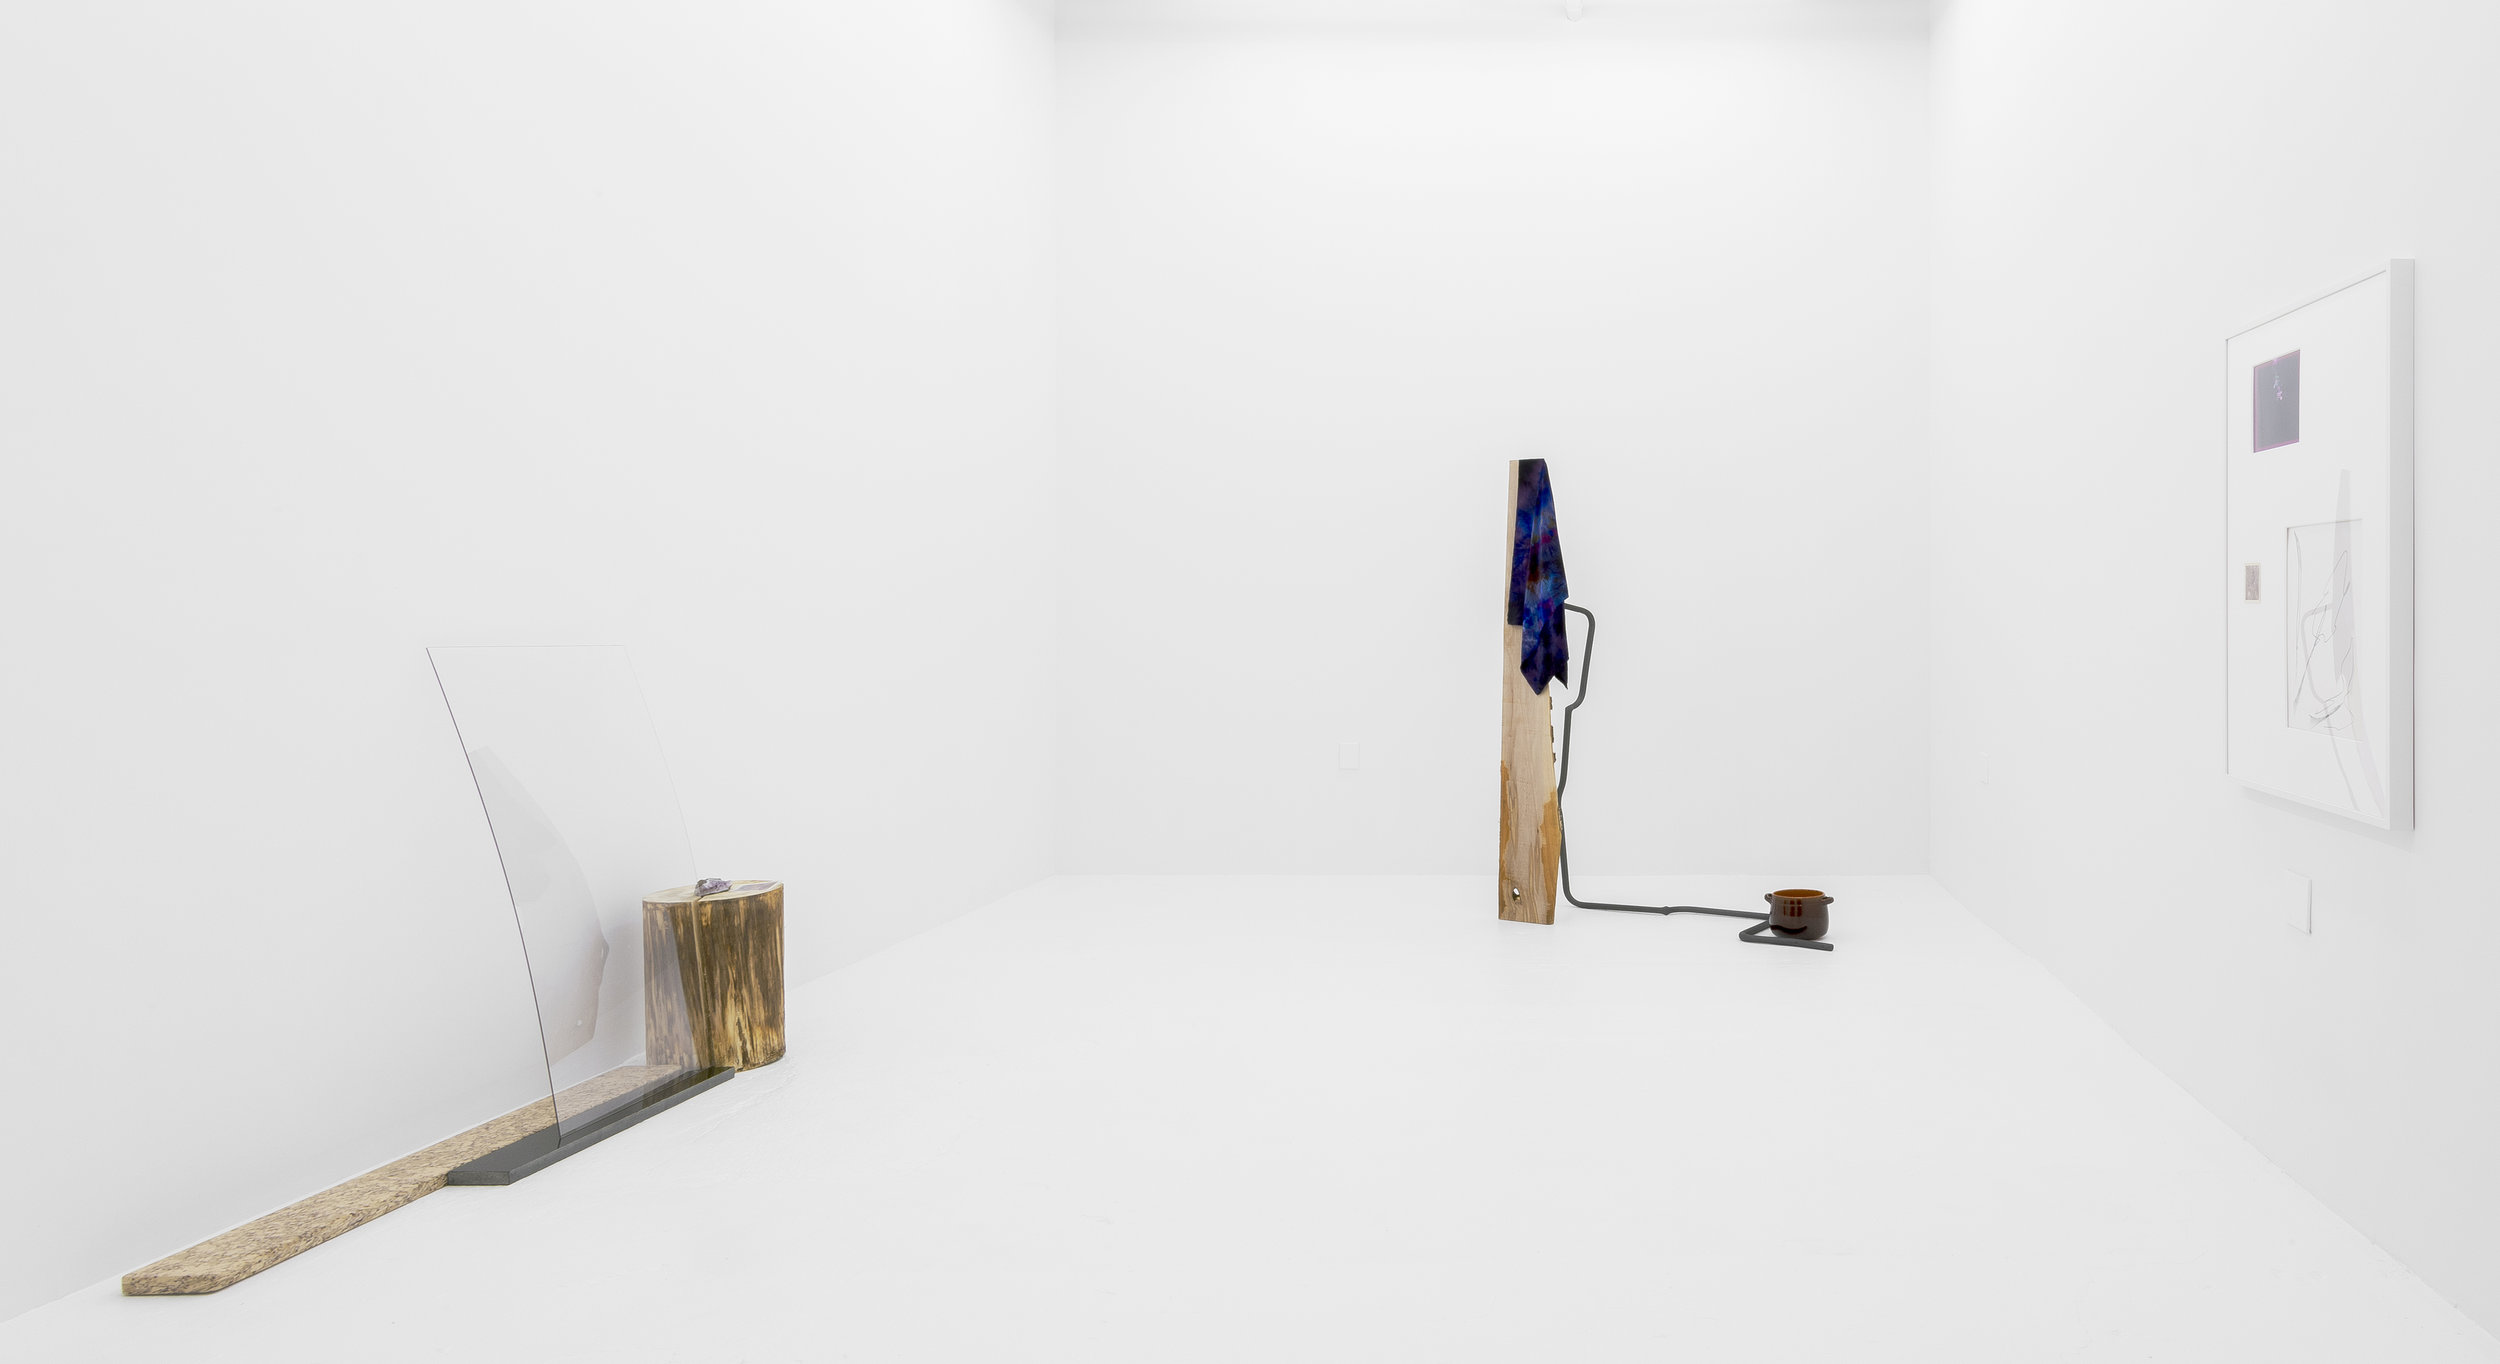  Connor McNicholas  A Center Such as This  Installation view 